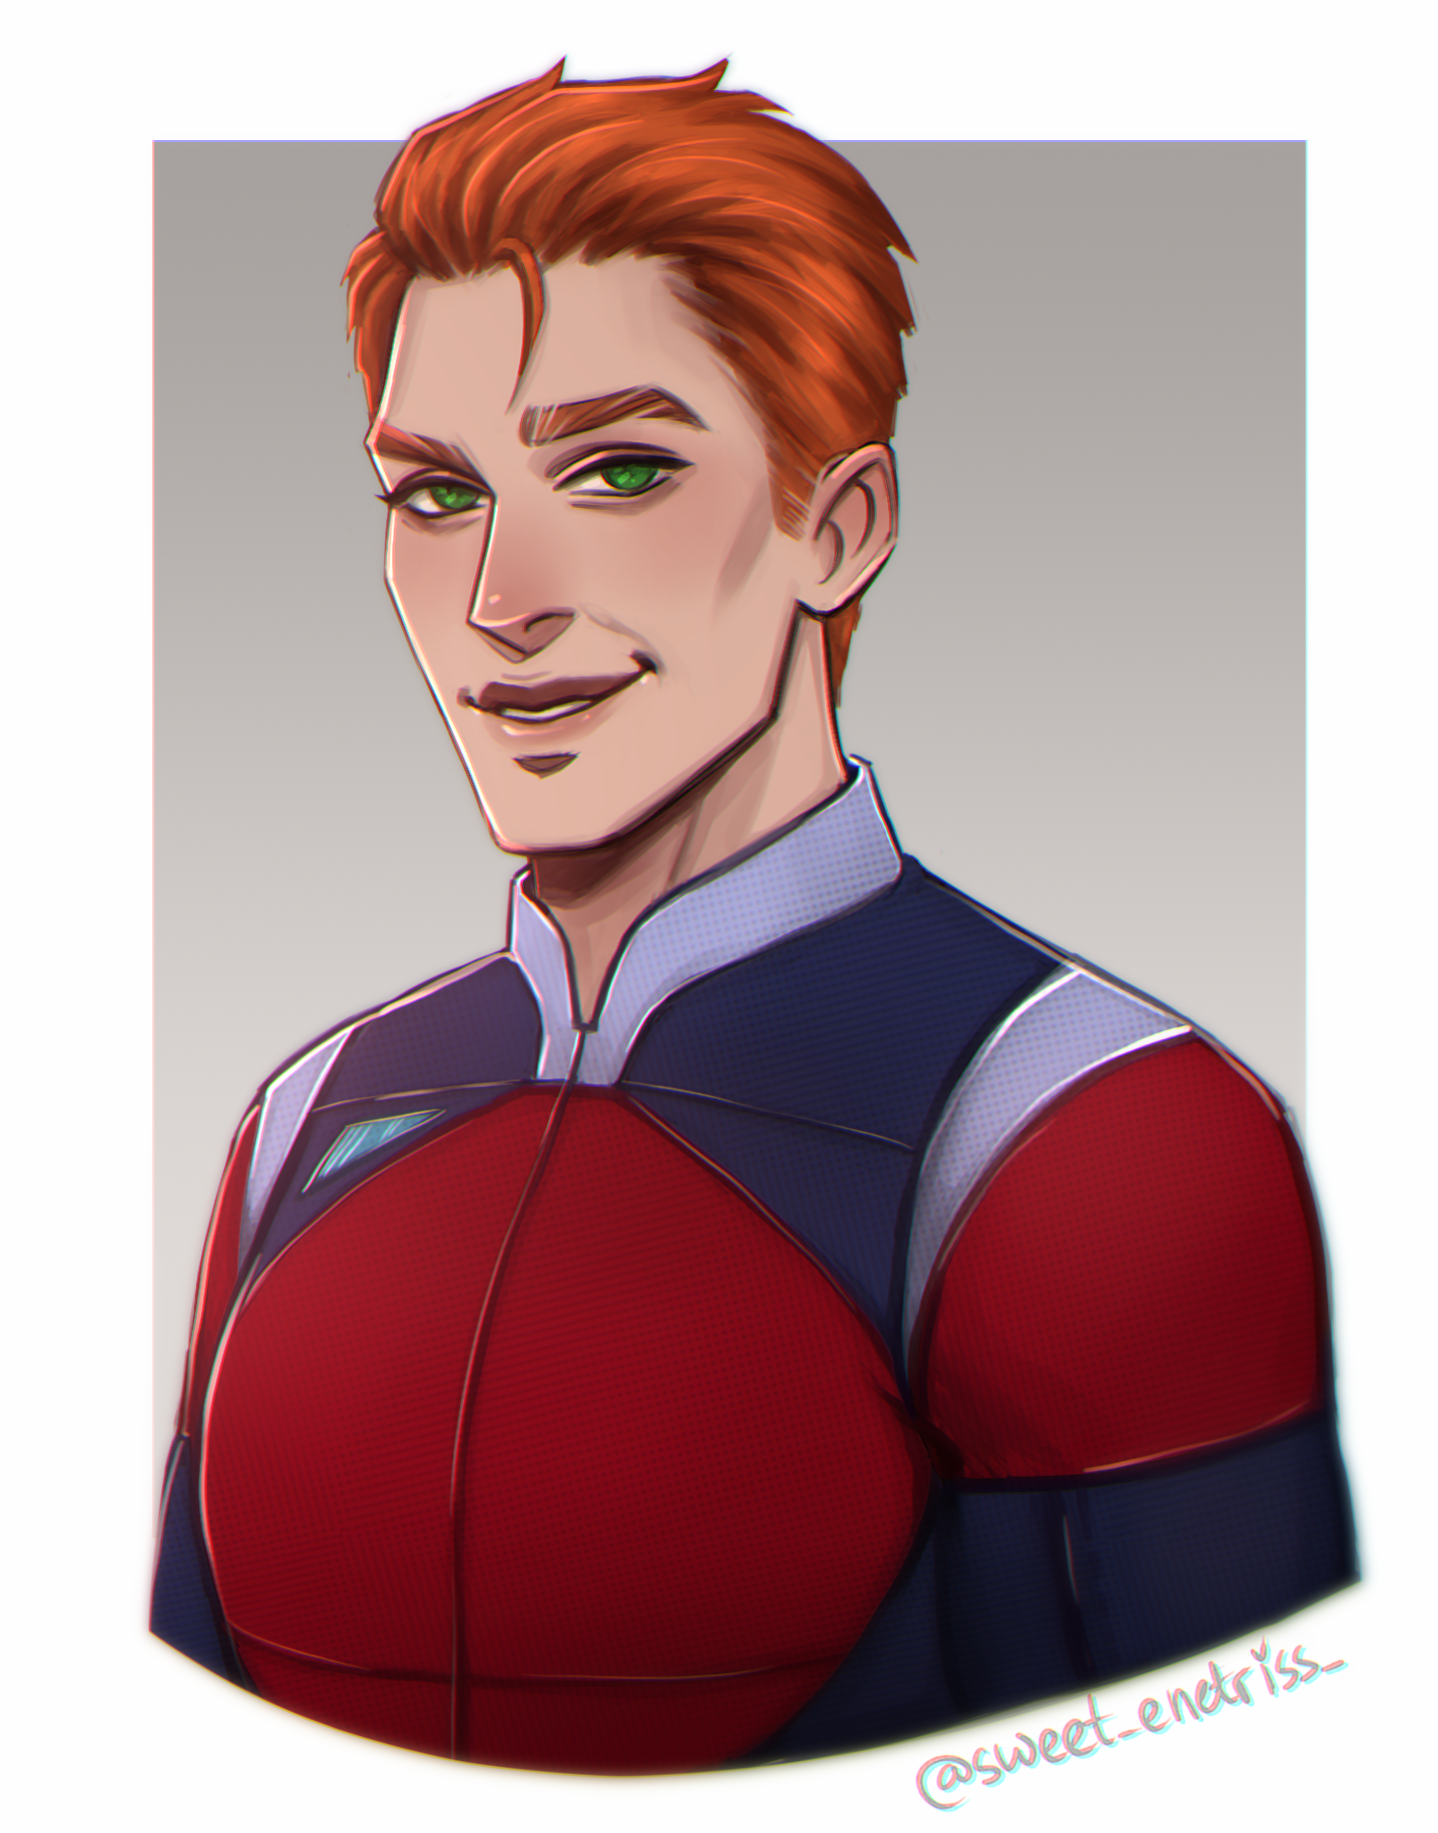 Daniel Becker by Sweet Enetriss commissioned by Wes